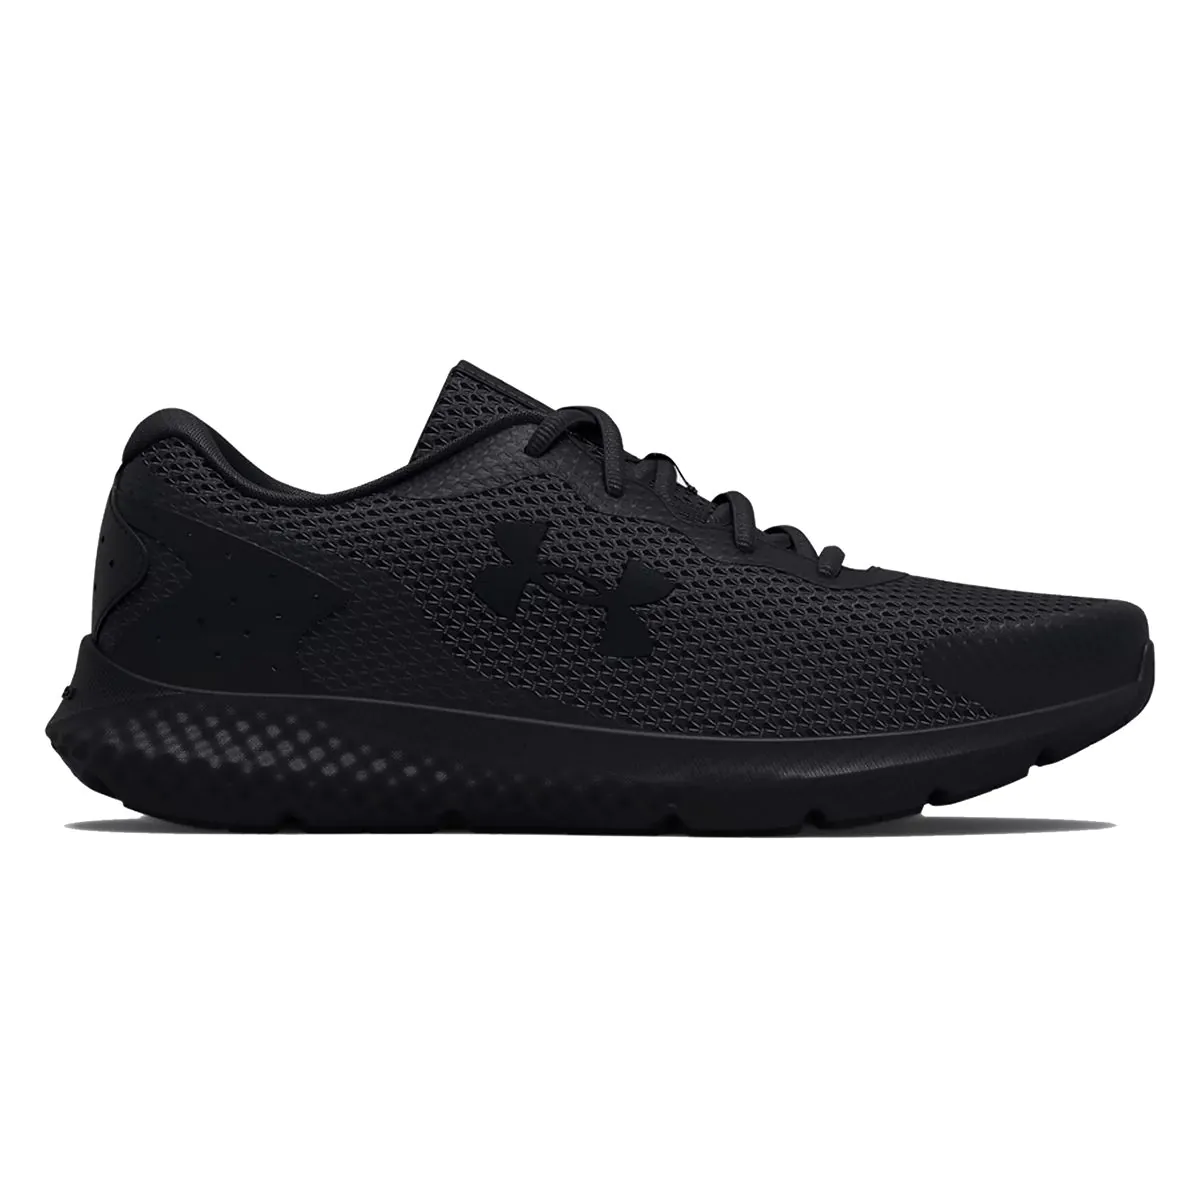 Under Armour Charged Rogue 3 Men's Running Shoes 3024877-003